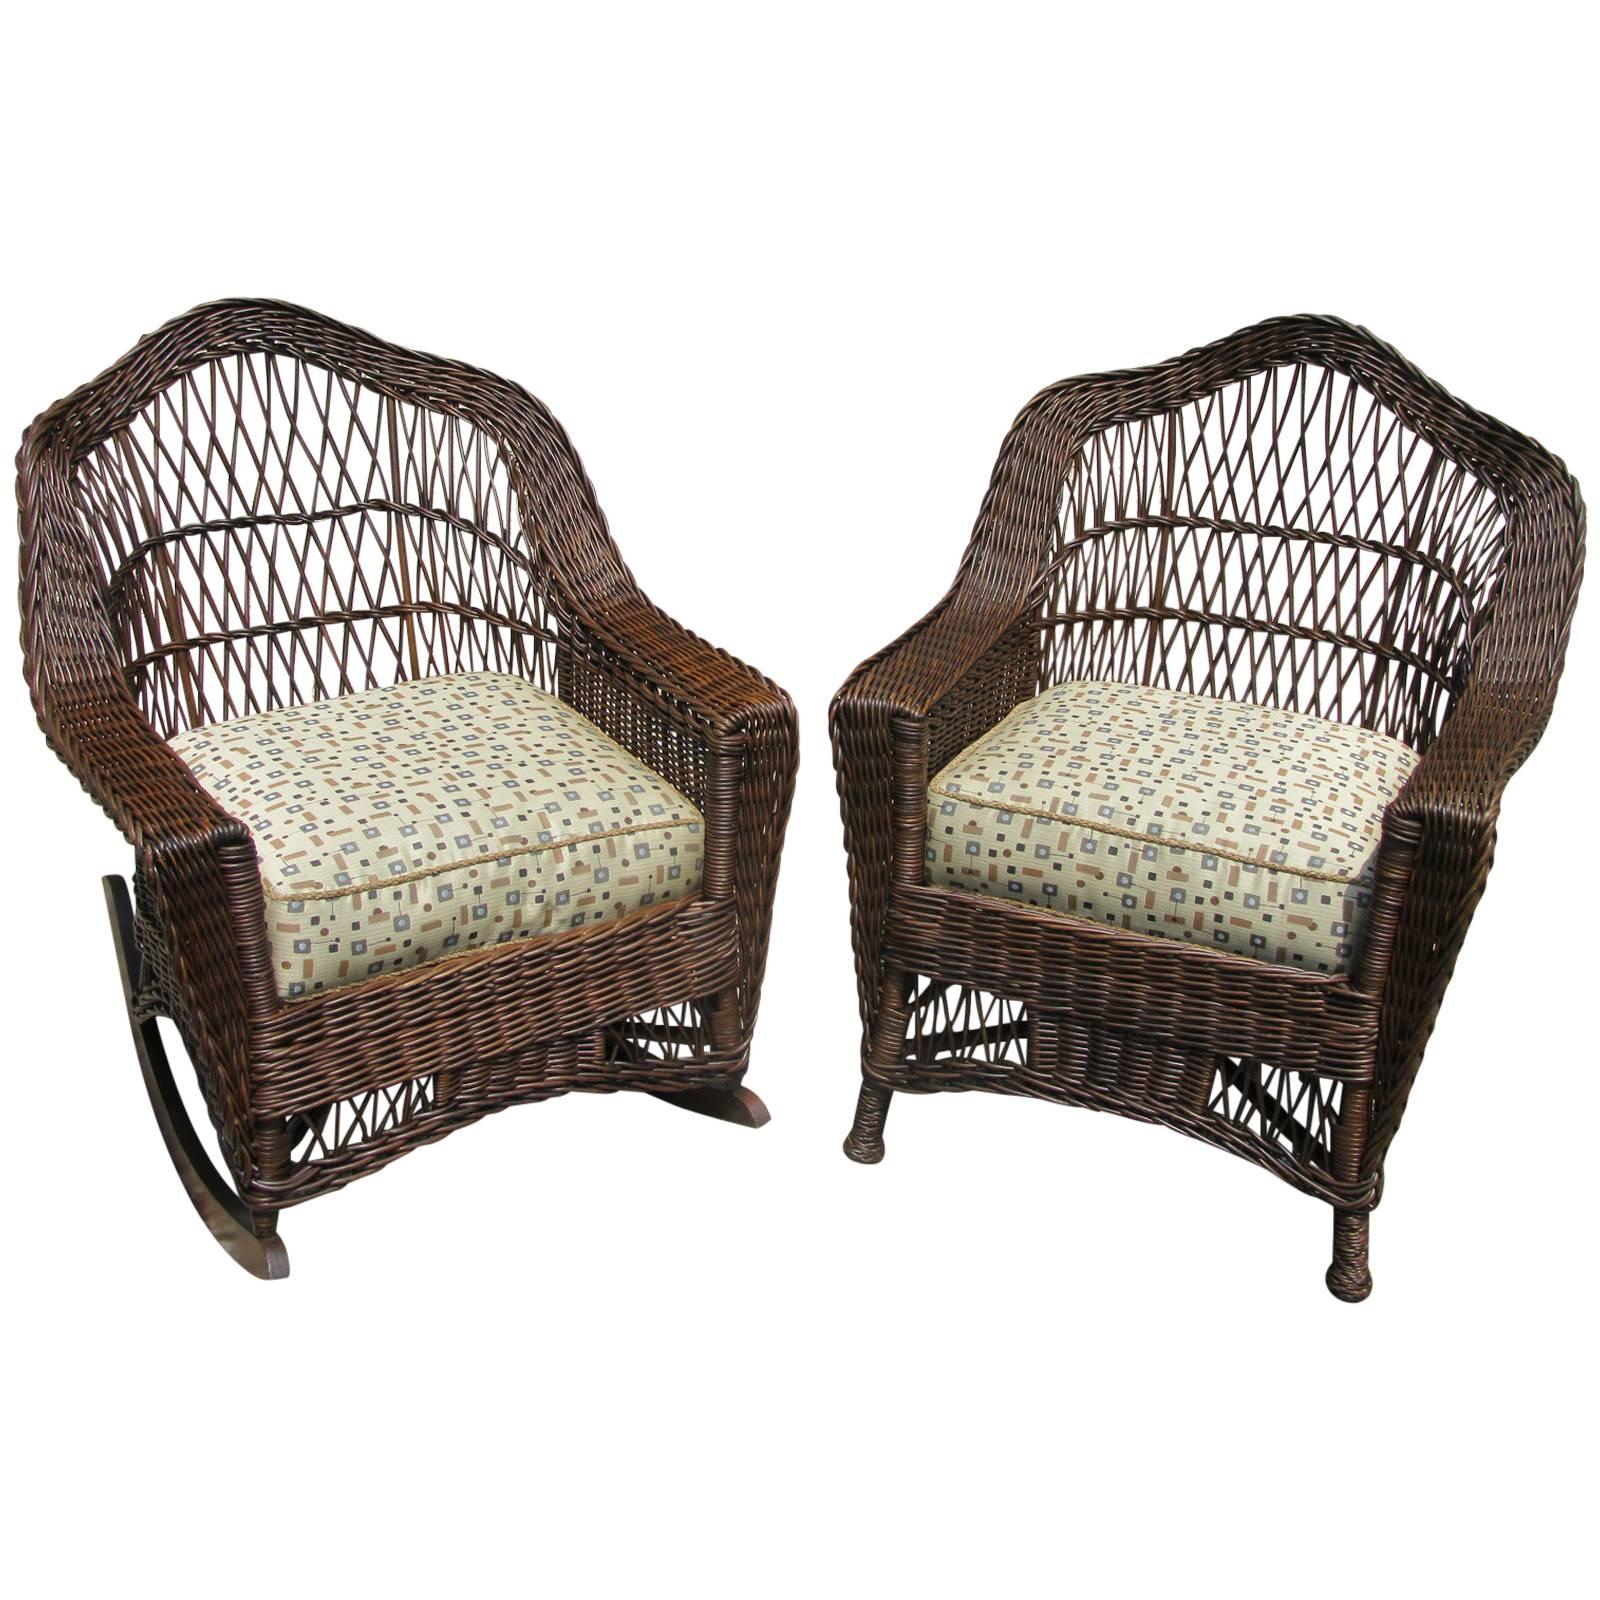 Matching Bar Harbor Wicker Armchair and Rocker For Sale